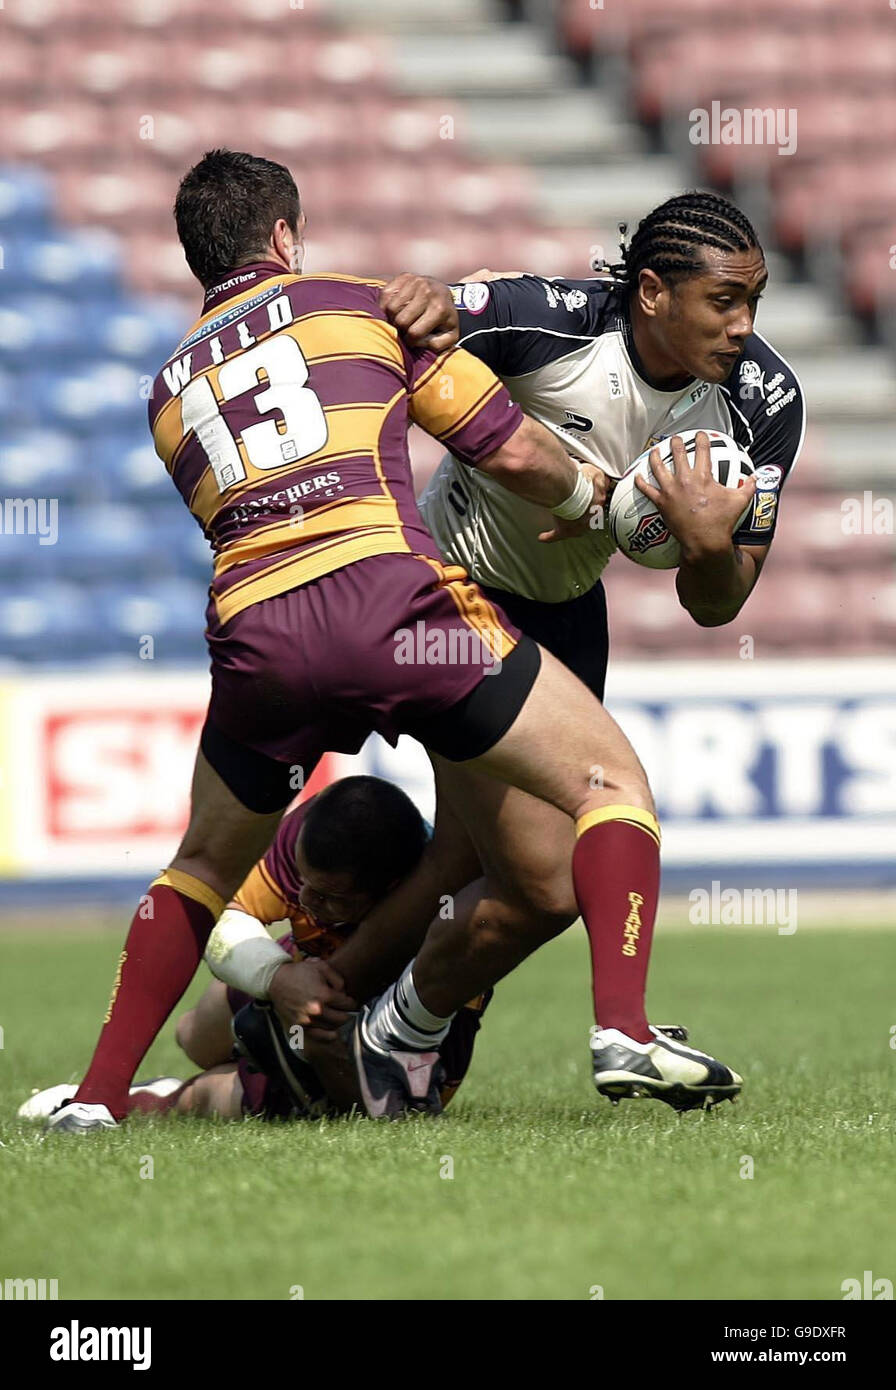 Rugby League - Engage Super League - Galpharm Stadium. Leeds' Ali Lauitiiti fights off Huddersfield's Stephen Wild during the Engage Super League match at Galpharm Stadium, Huddersfield. Stock Photo